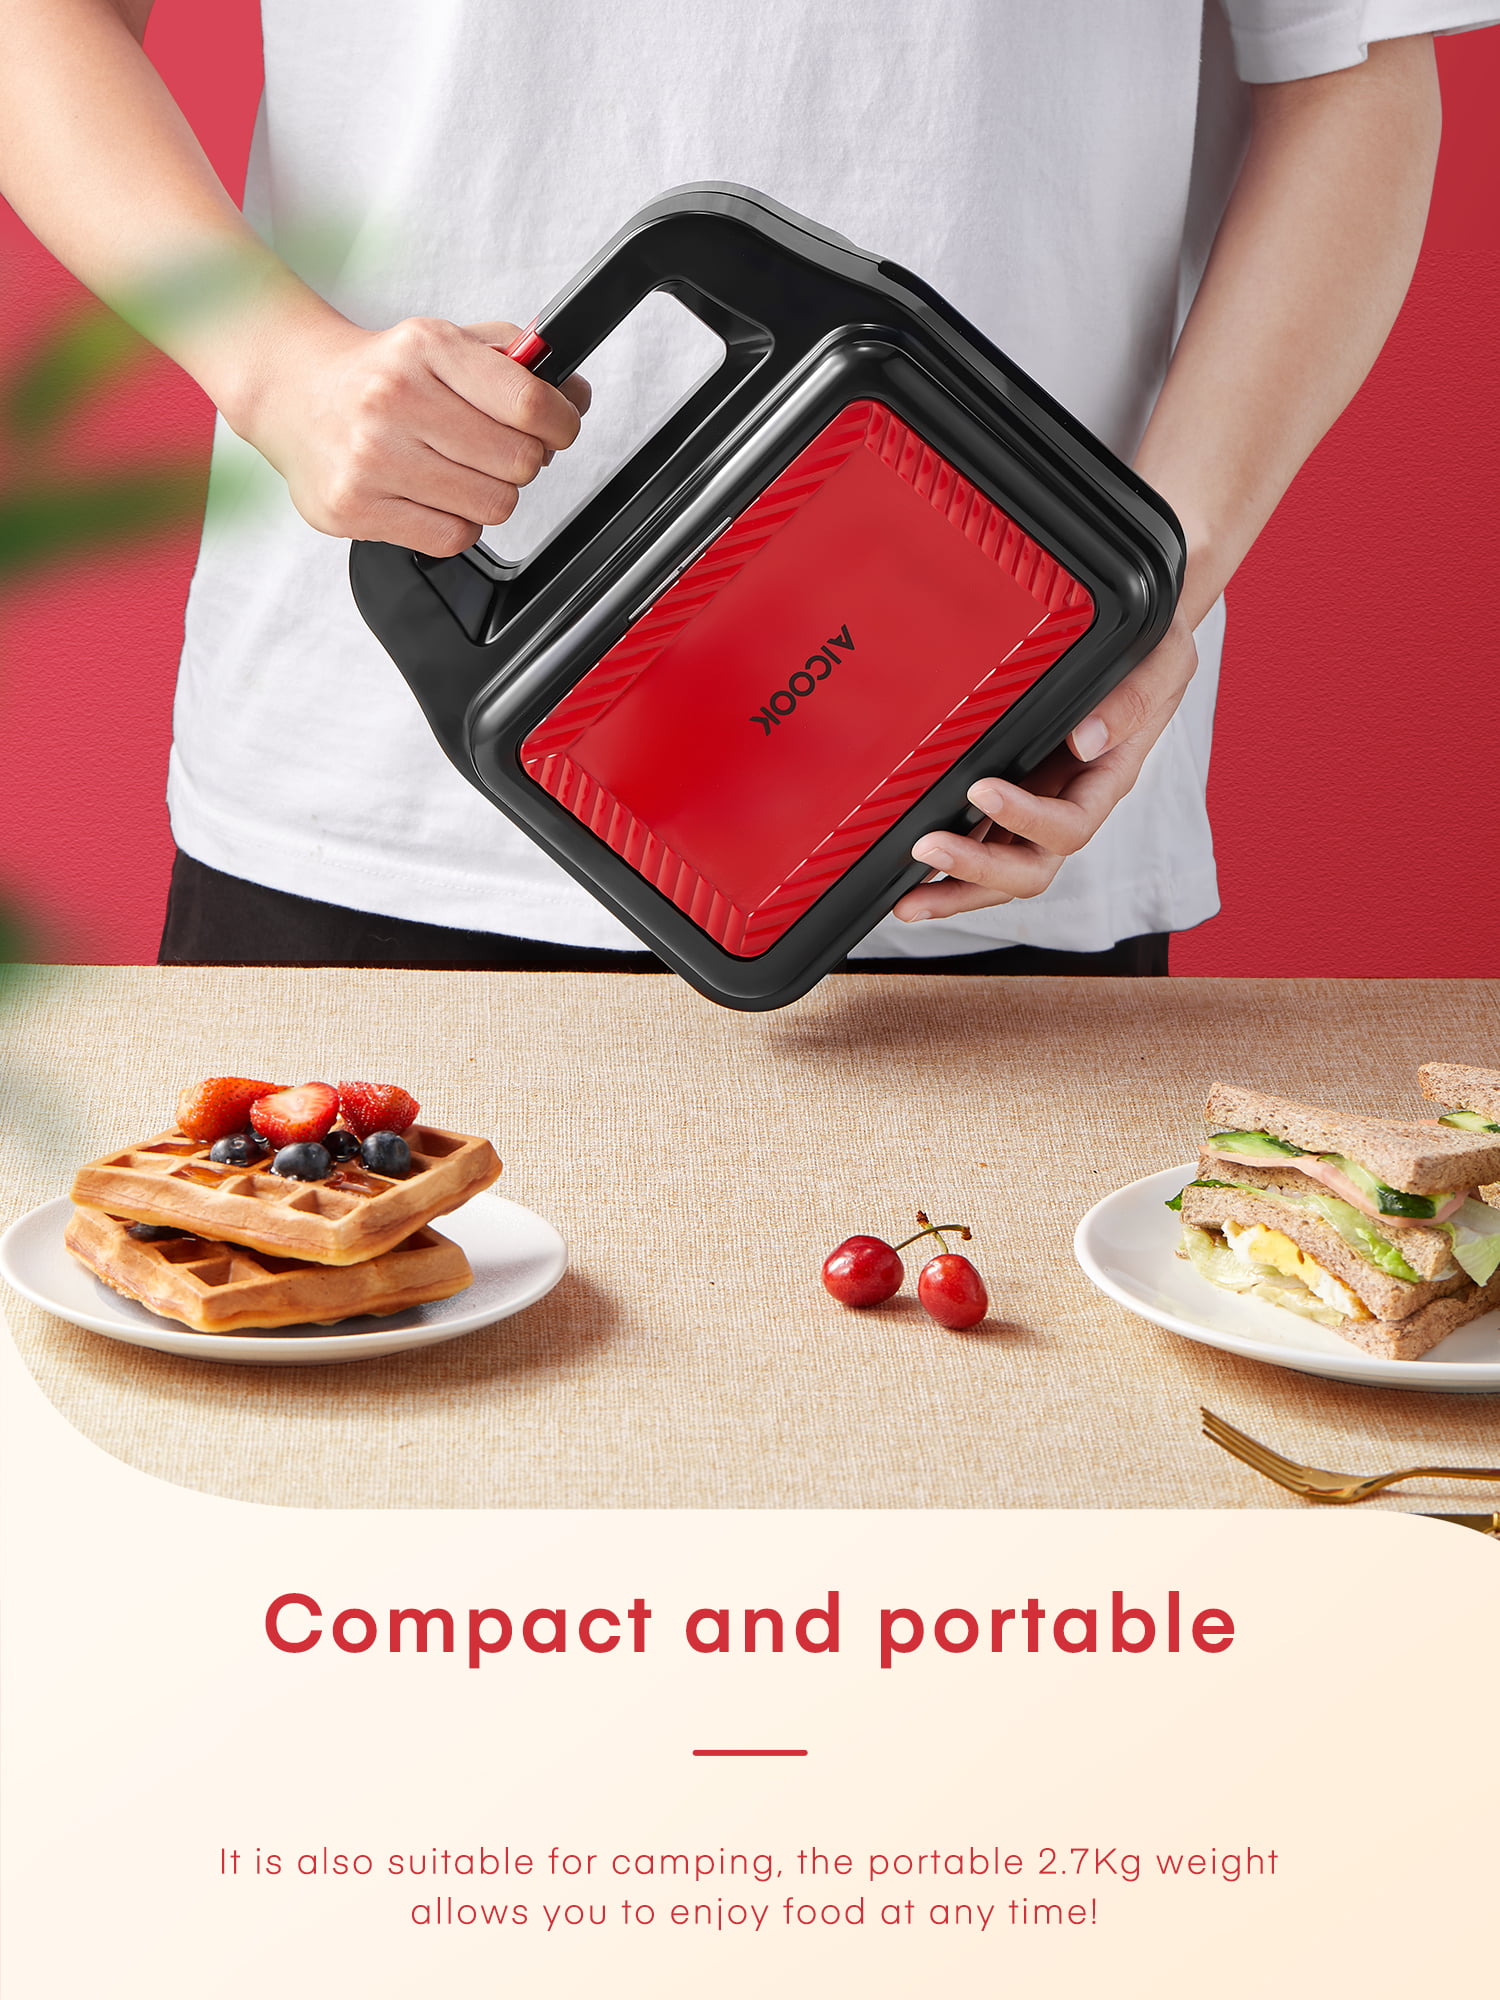 AICOK Sandwich Maker, Waffle Maker, Panini Press Grill, 3-in-1 Detachable  Non-Stick Plates, LED Indicator, Cool Touch Handle, Dishwasher Safe